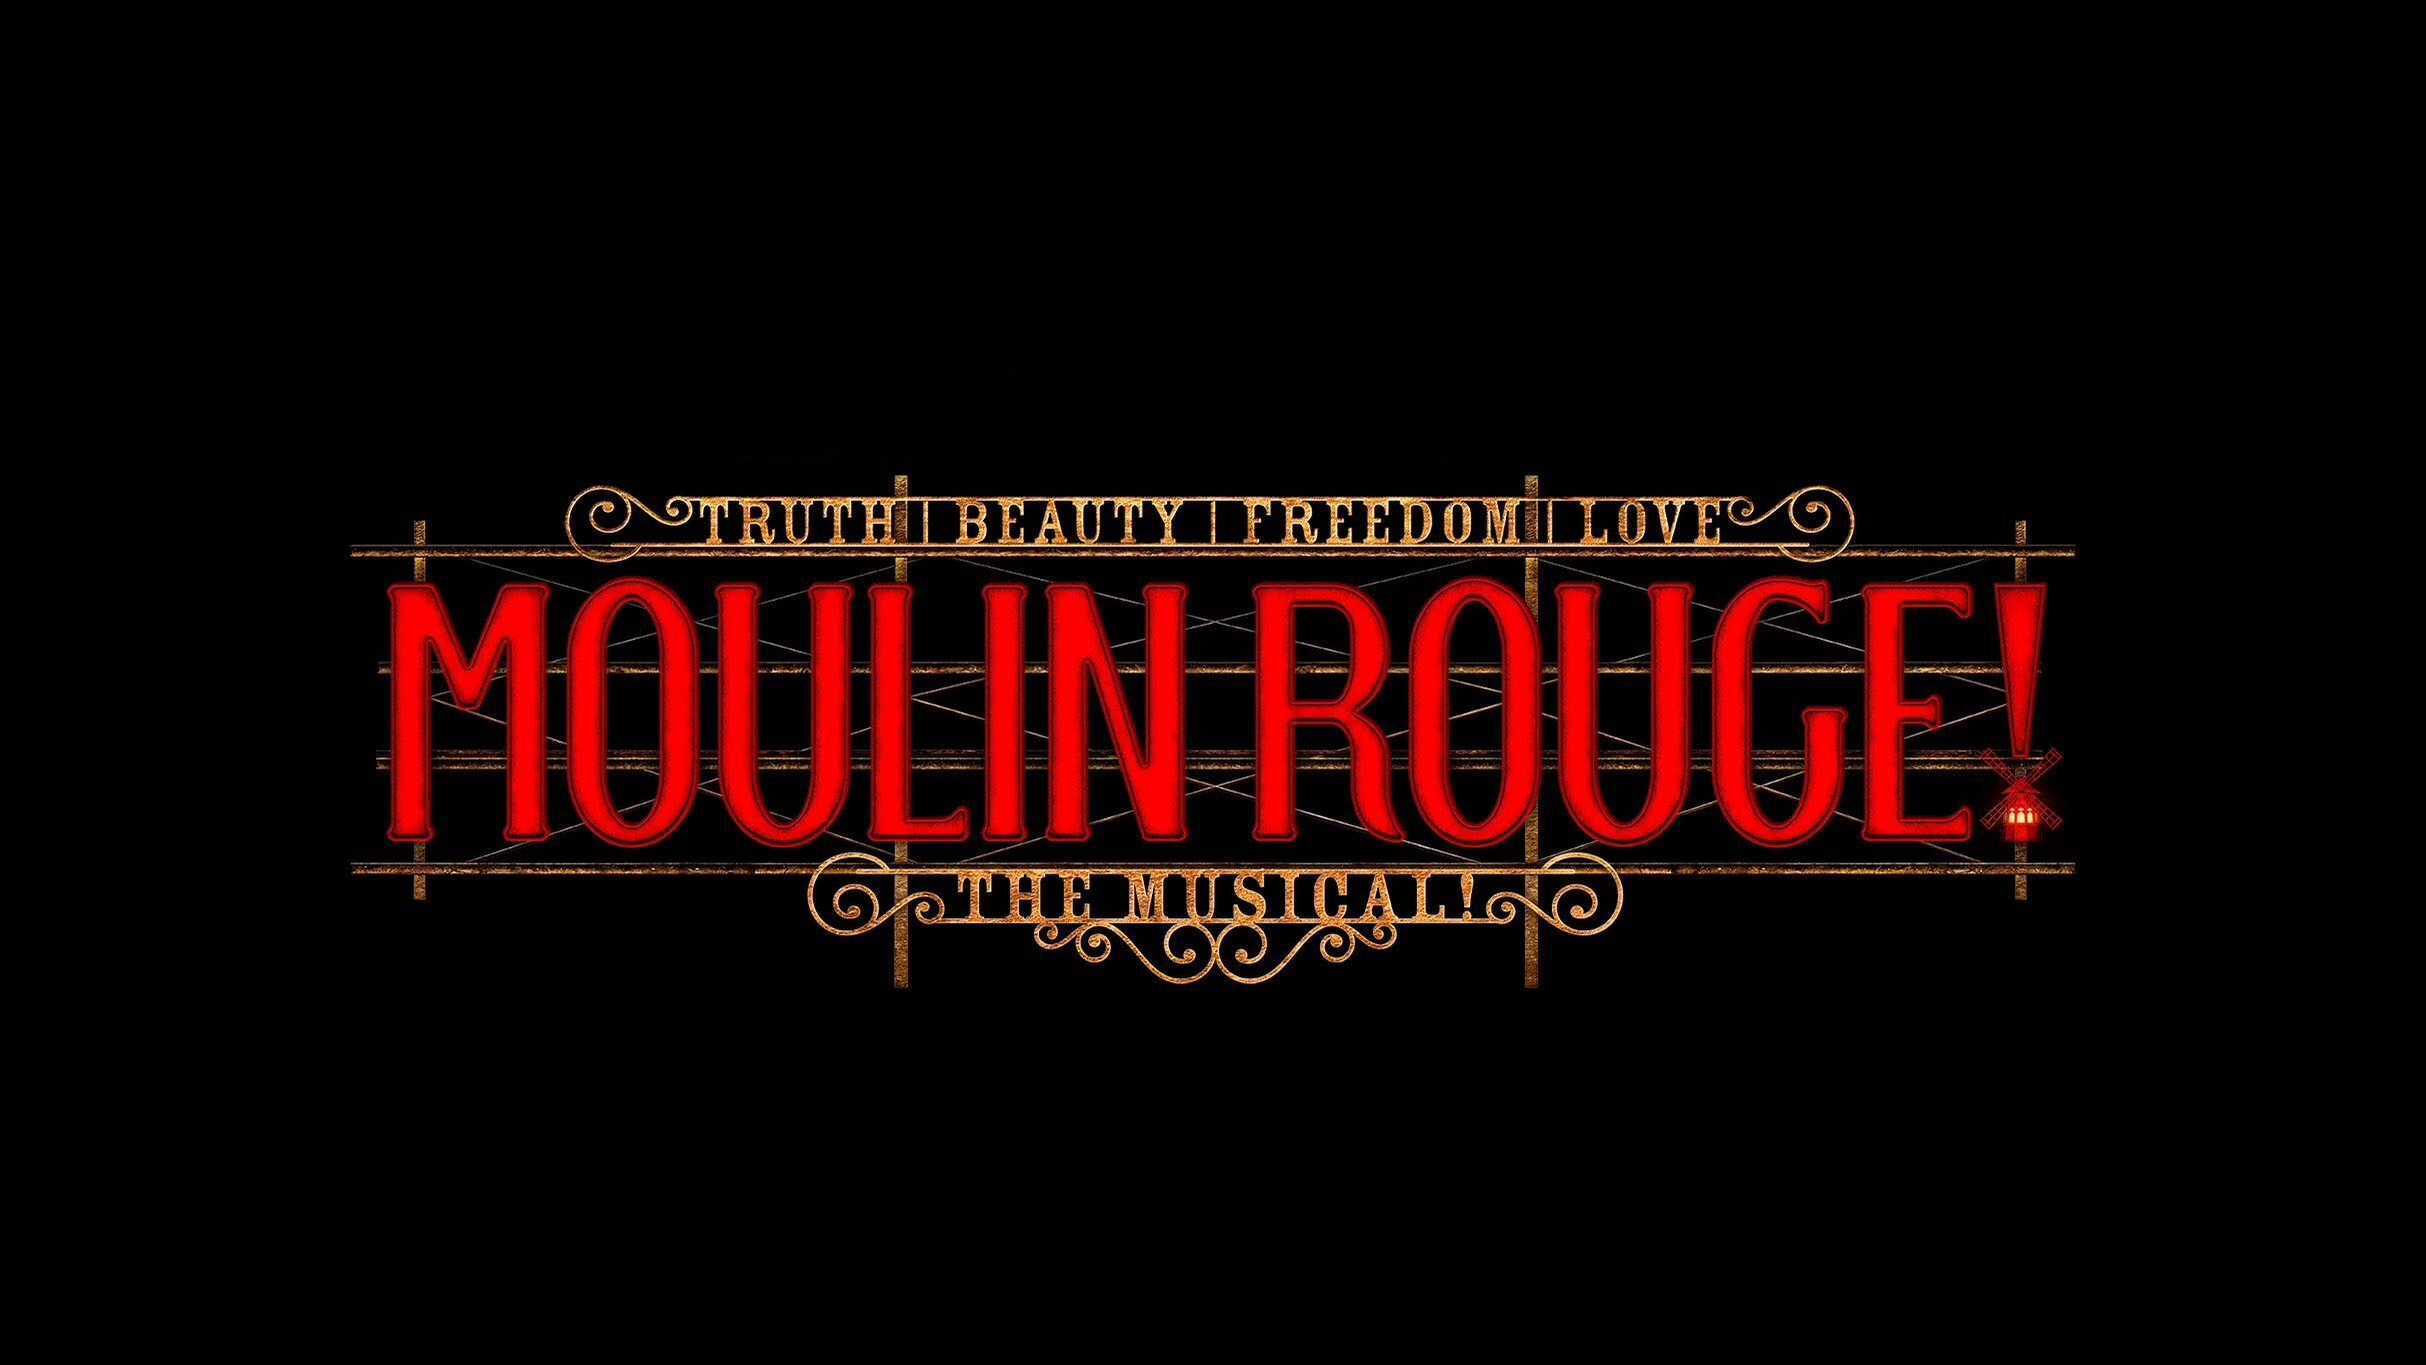 Moulin Rouge (Touring) in Kansas City promo photo for Ticketmaster presale offer code